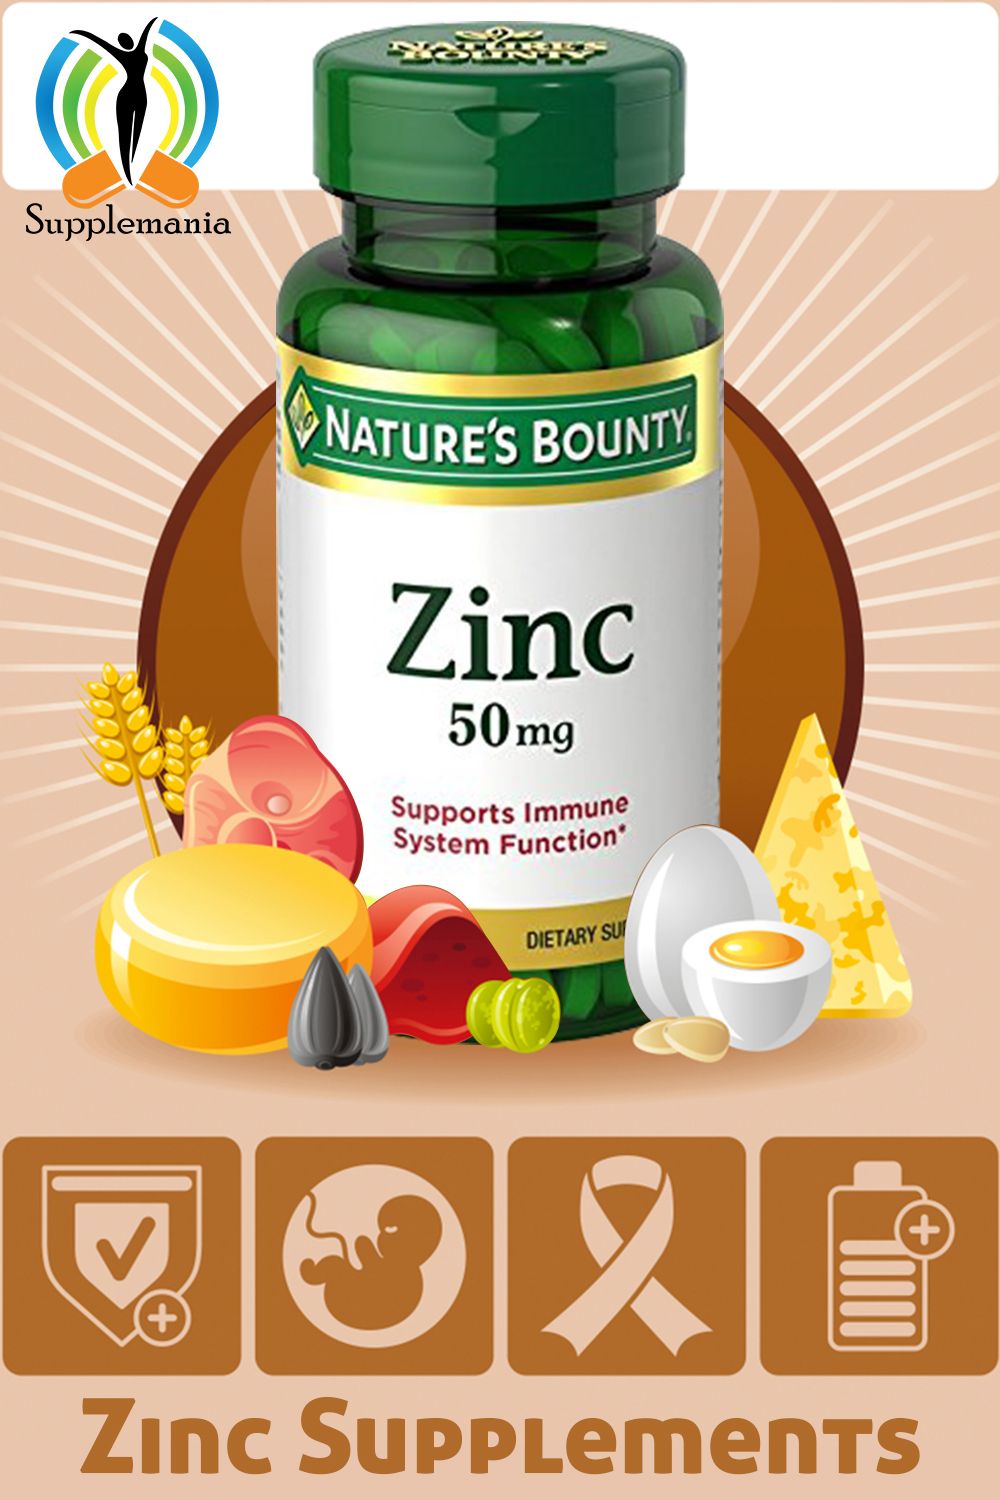 what is the benefit of zinc